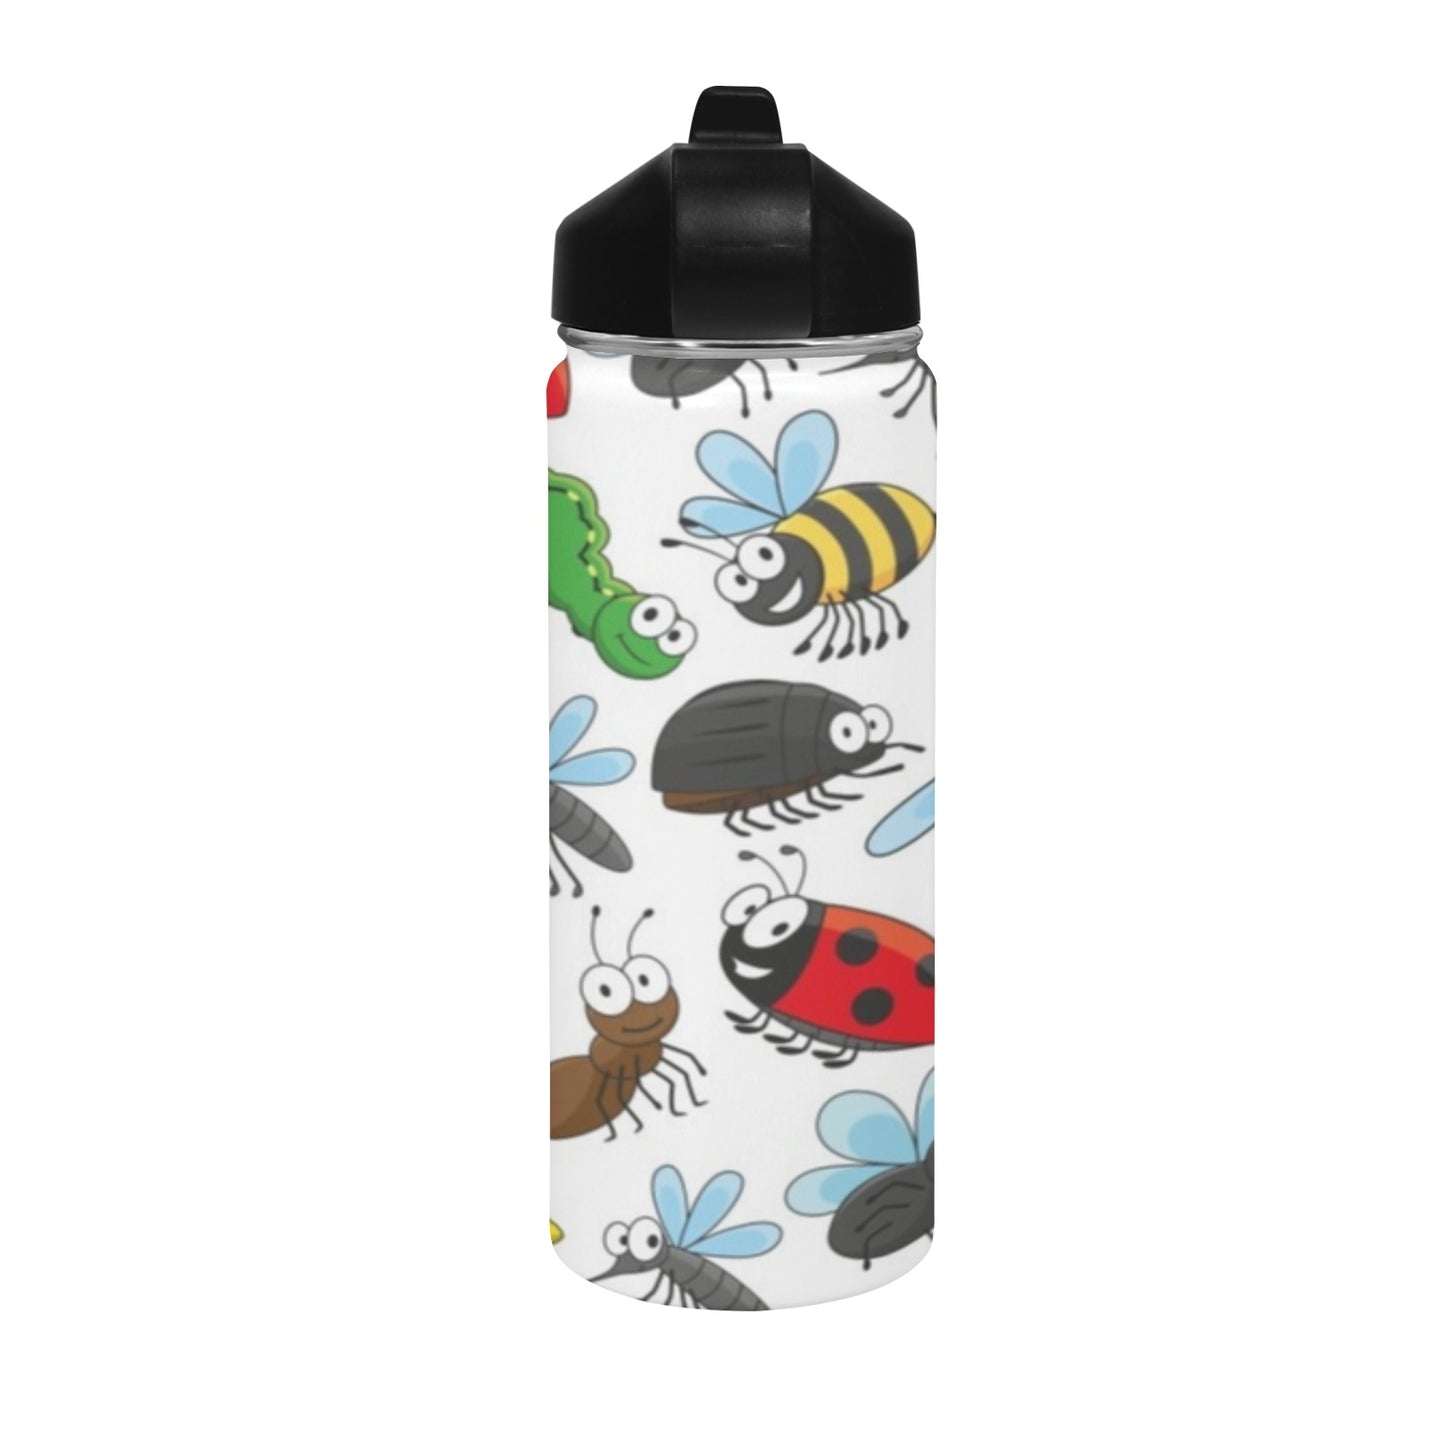 Little Creatures - Insulated Water Bottle with Straw Lid (18 oz) Insulated Water Bottle with Straw Lid